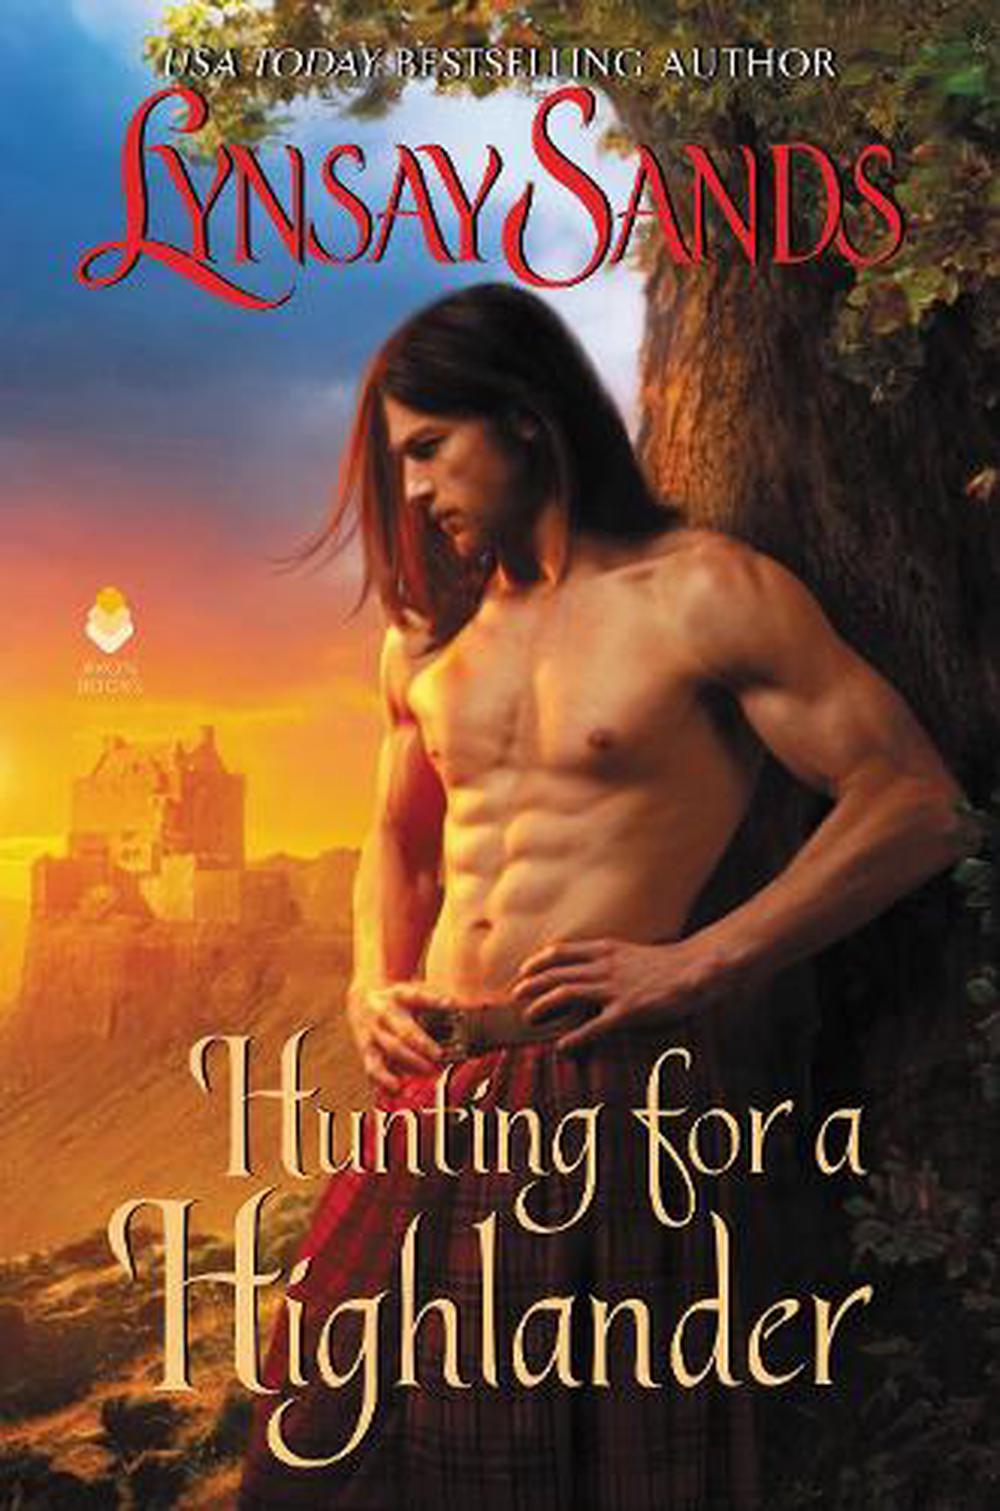 Falling for the Highlander by Lynsay Sands